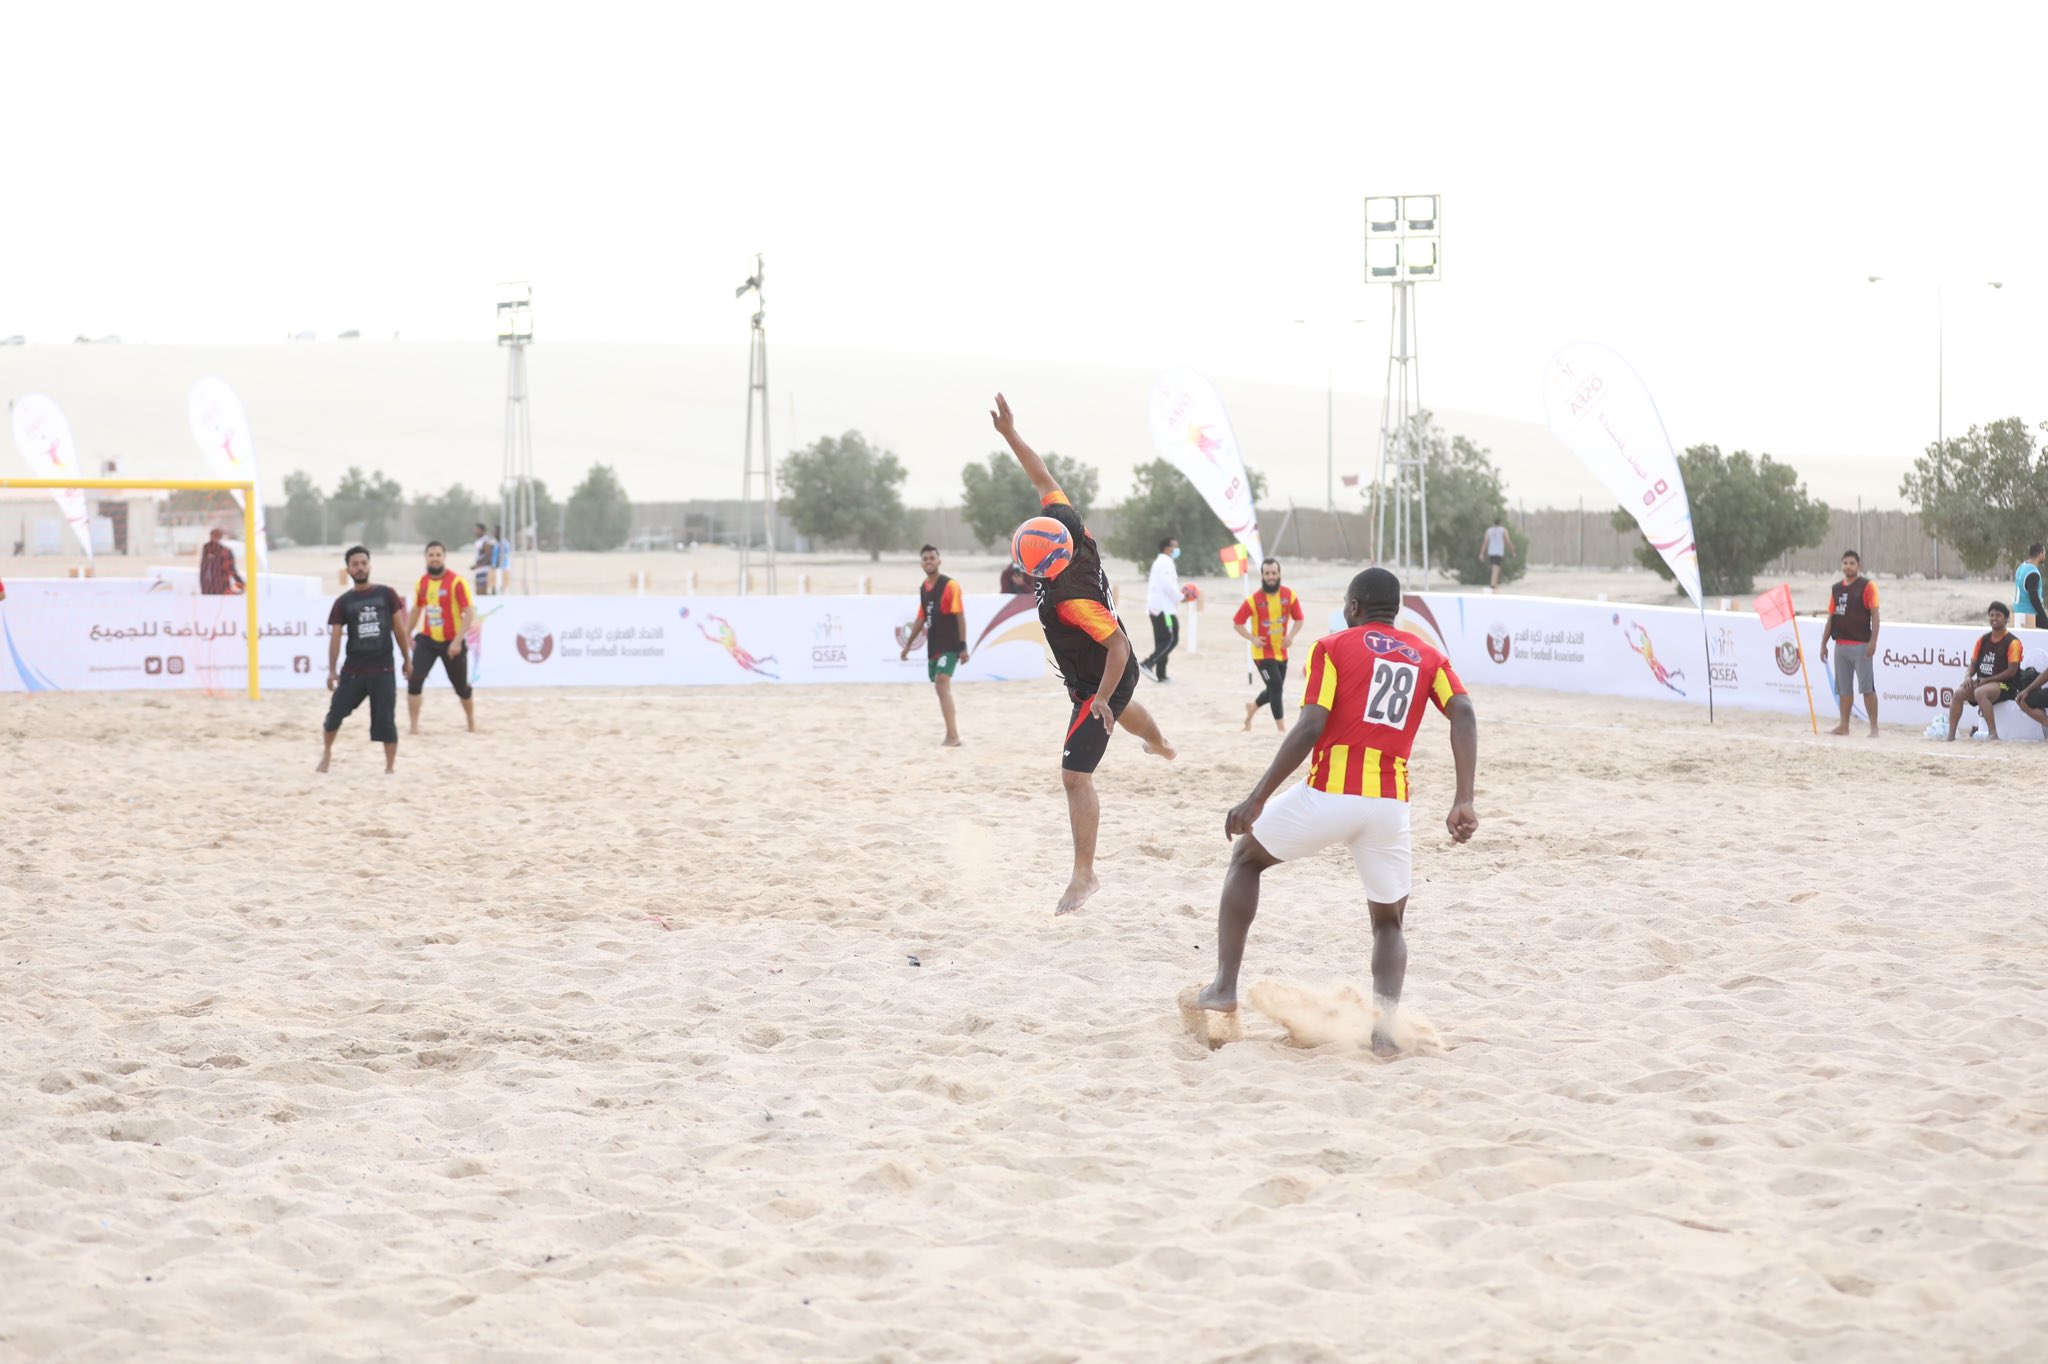 Minister of Culture and Sports Opens Beach Tournament at Sealine